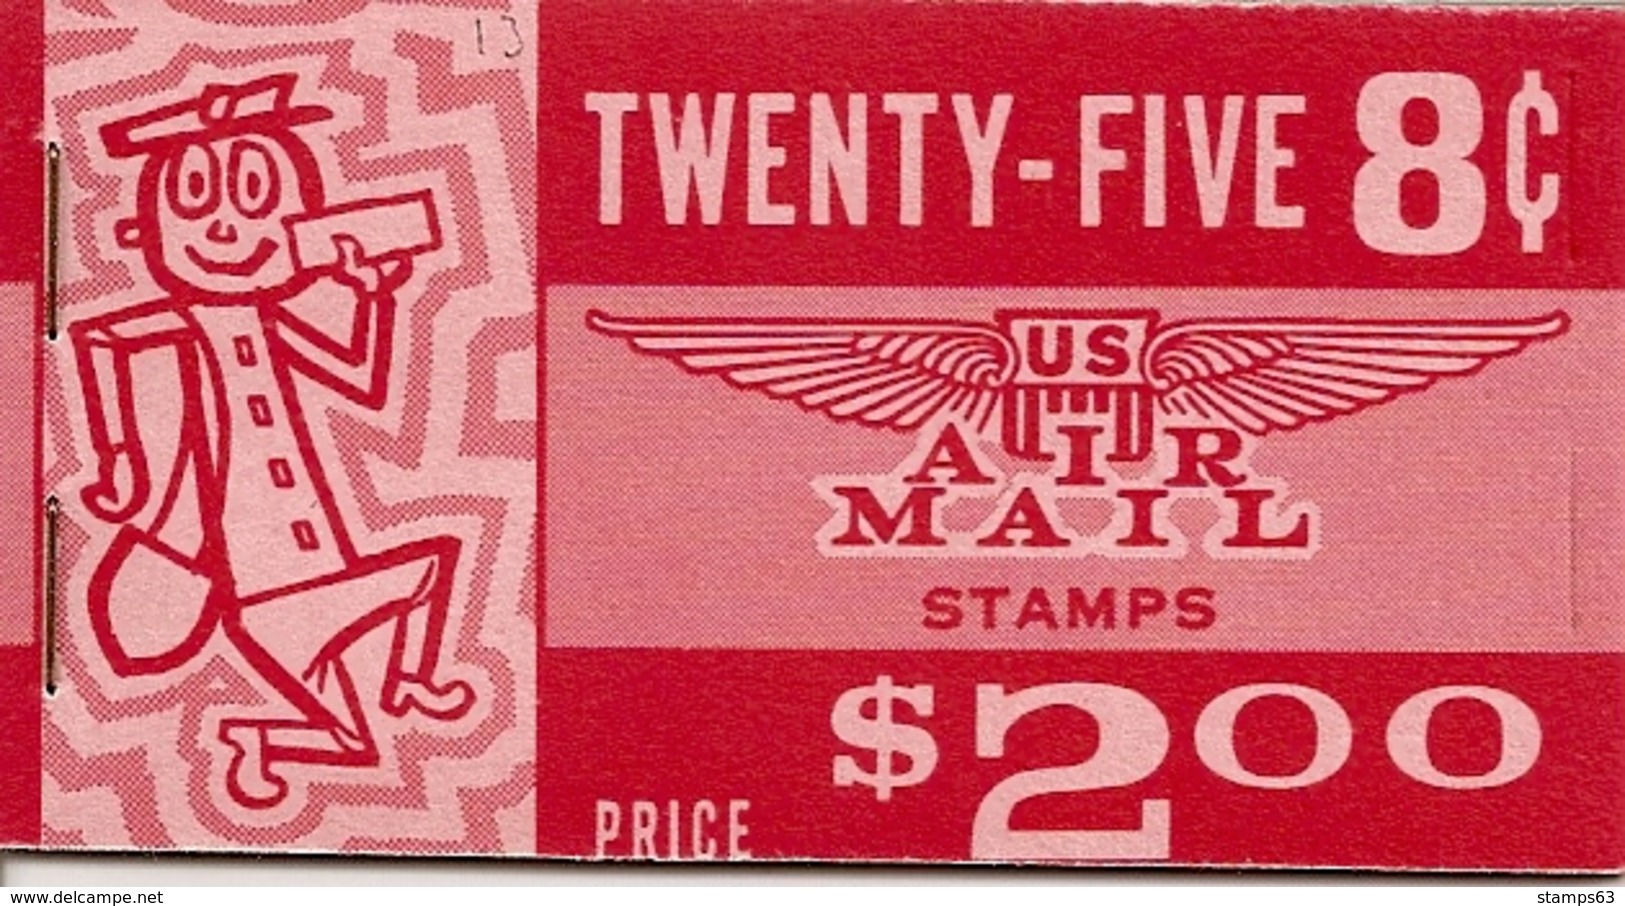 UNITED STATES (USA), 1963, Air Mail Booklet C13, $ 2.00 Red, Mi 71b - 2. 1941-80